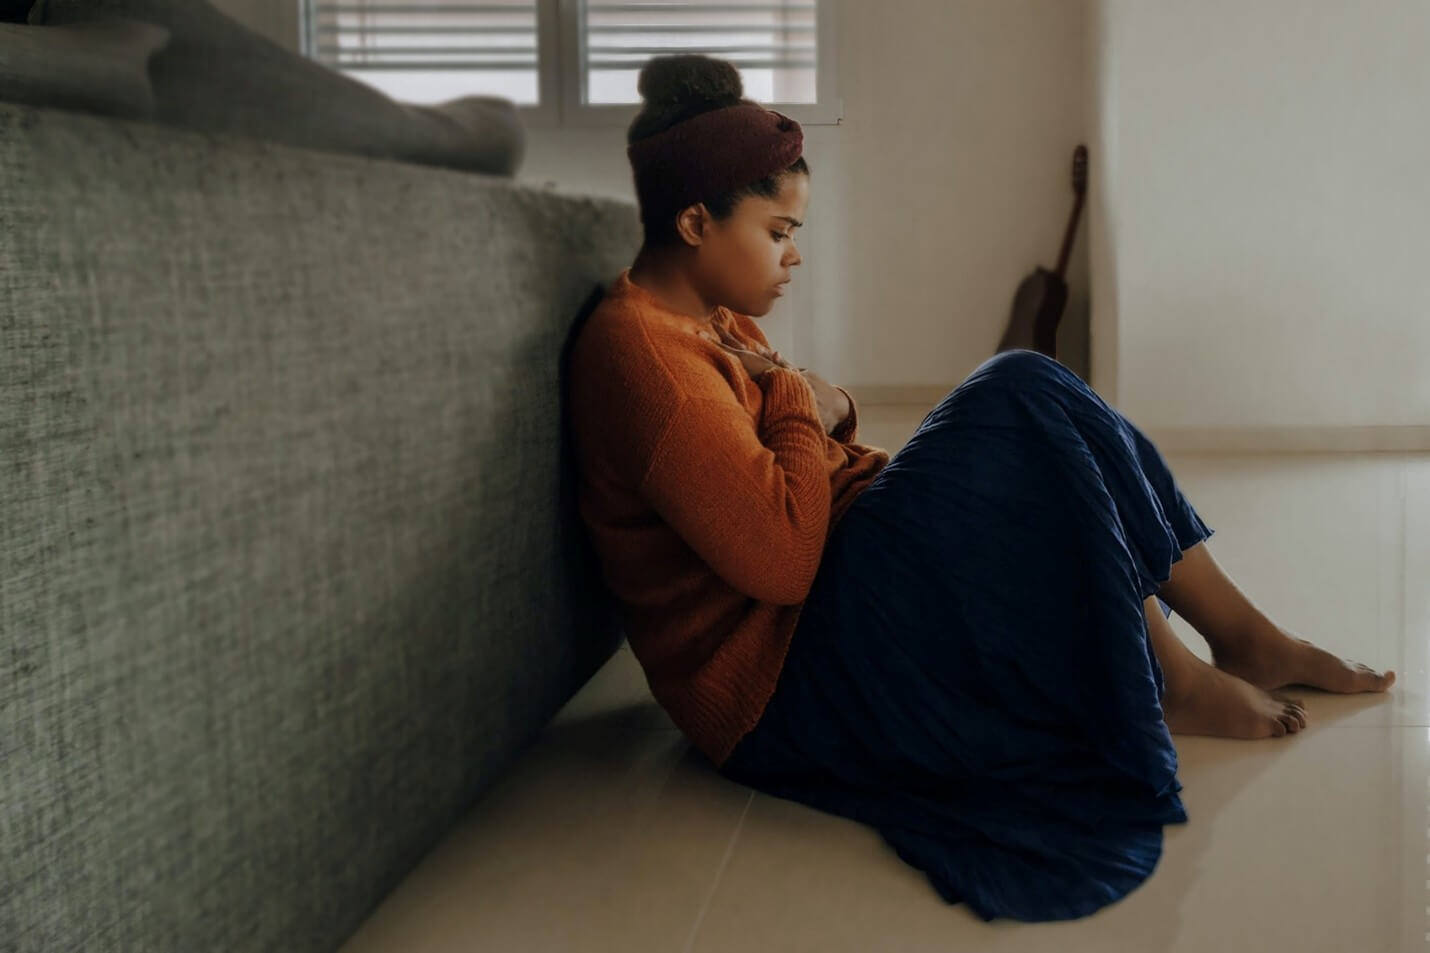 A young Black woman sits on the floor looking depressed.